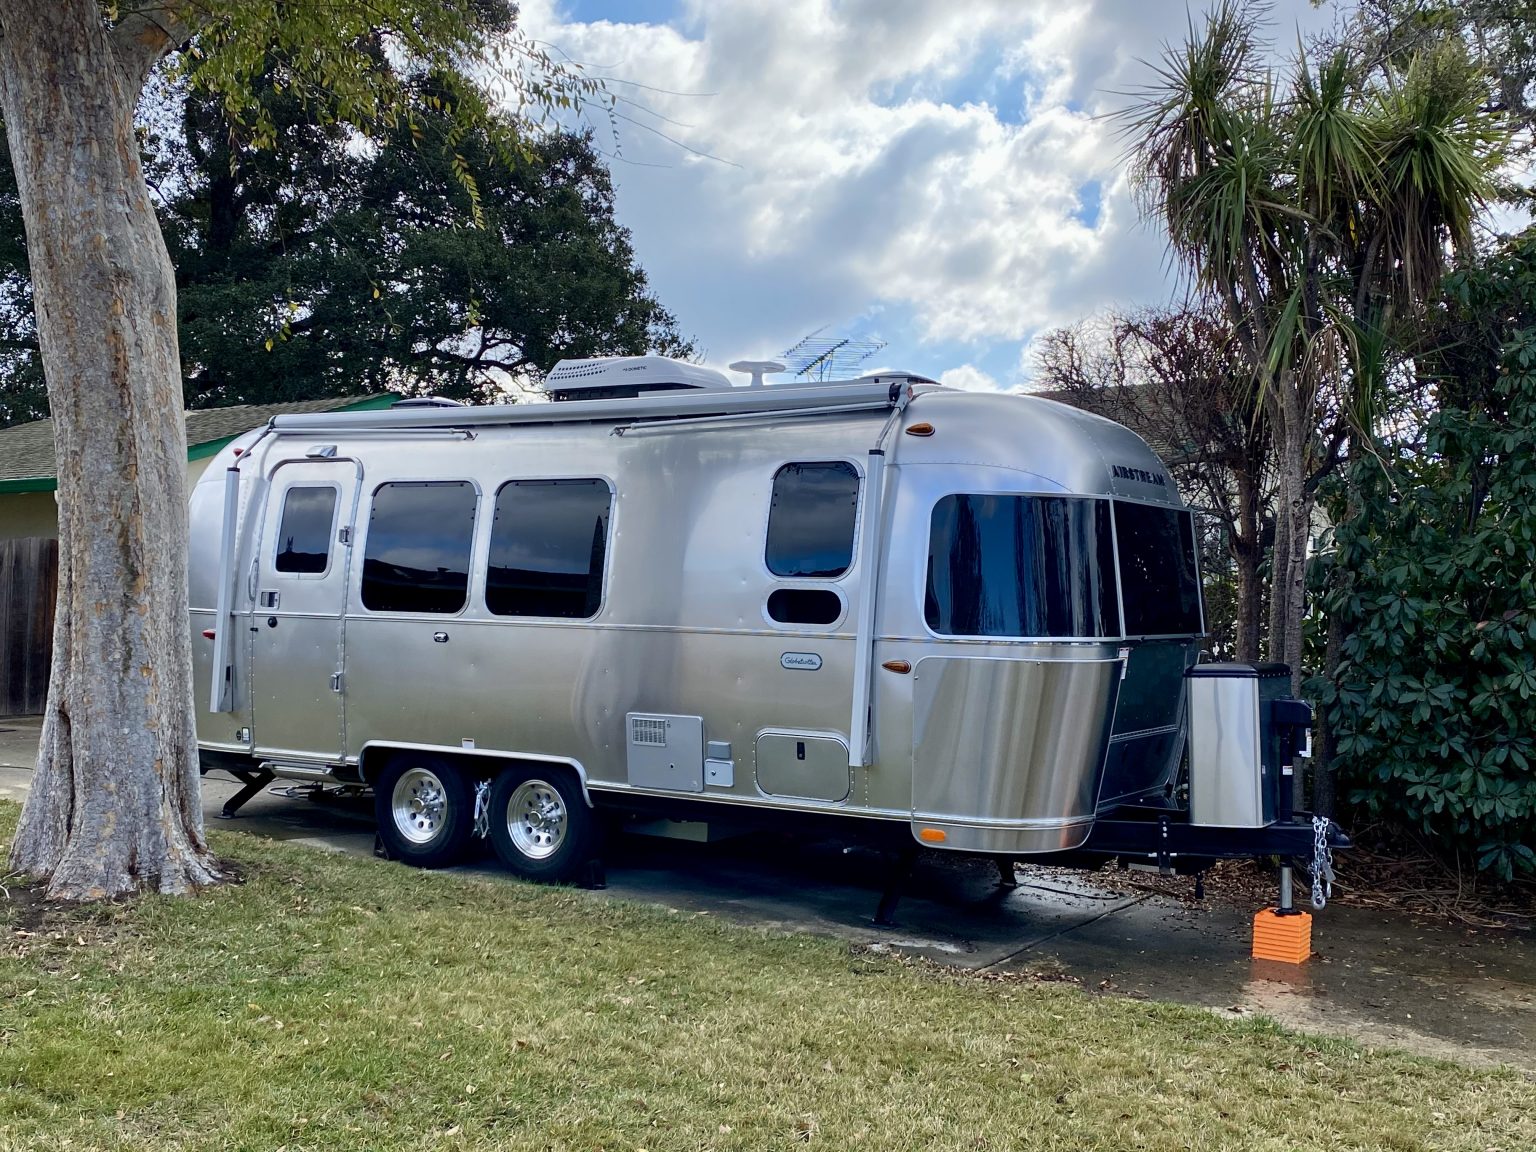 2020 Airstream 23FT Globe Trotter For Sale in San Jose - Airstream Used Airstream Globetrotter 23 Twin For Sale